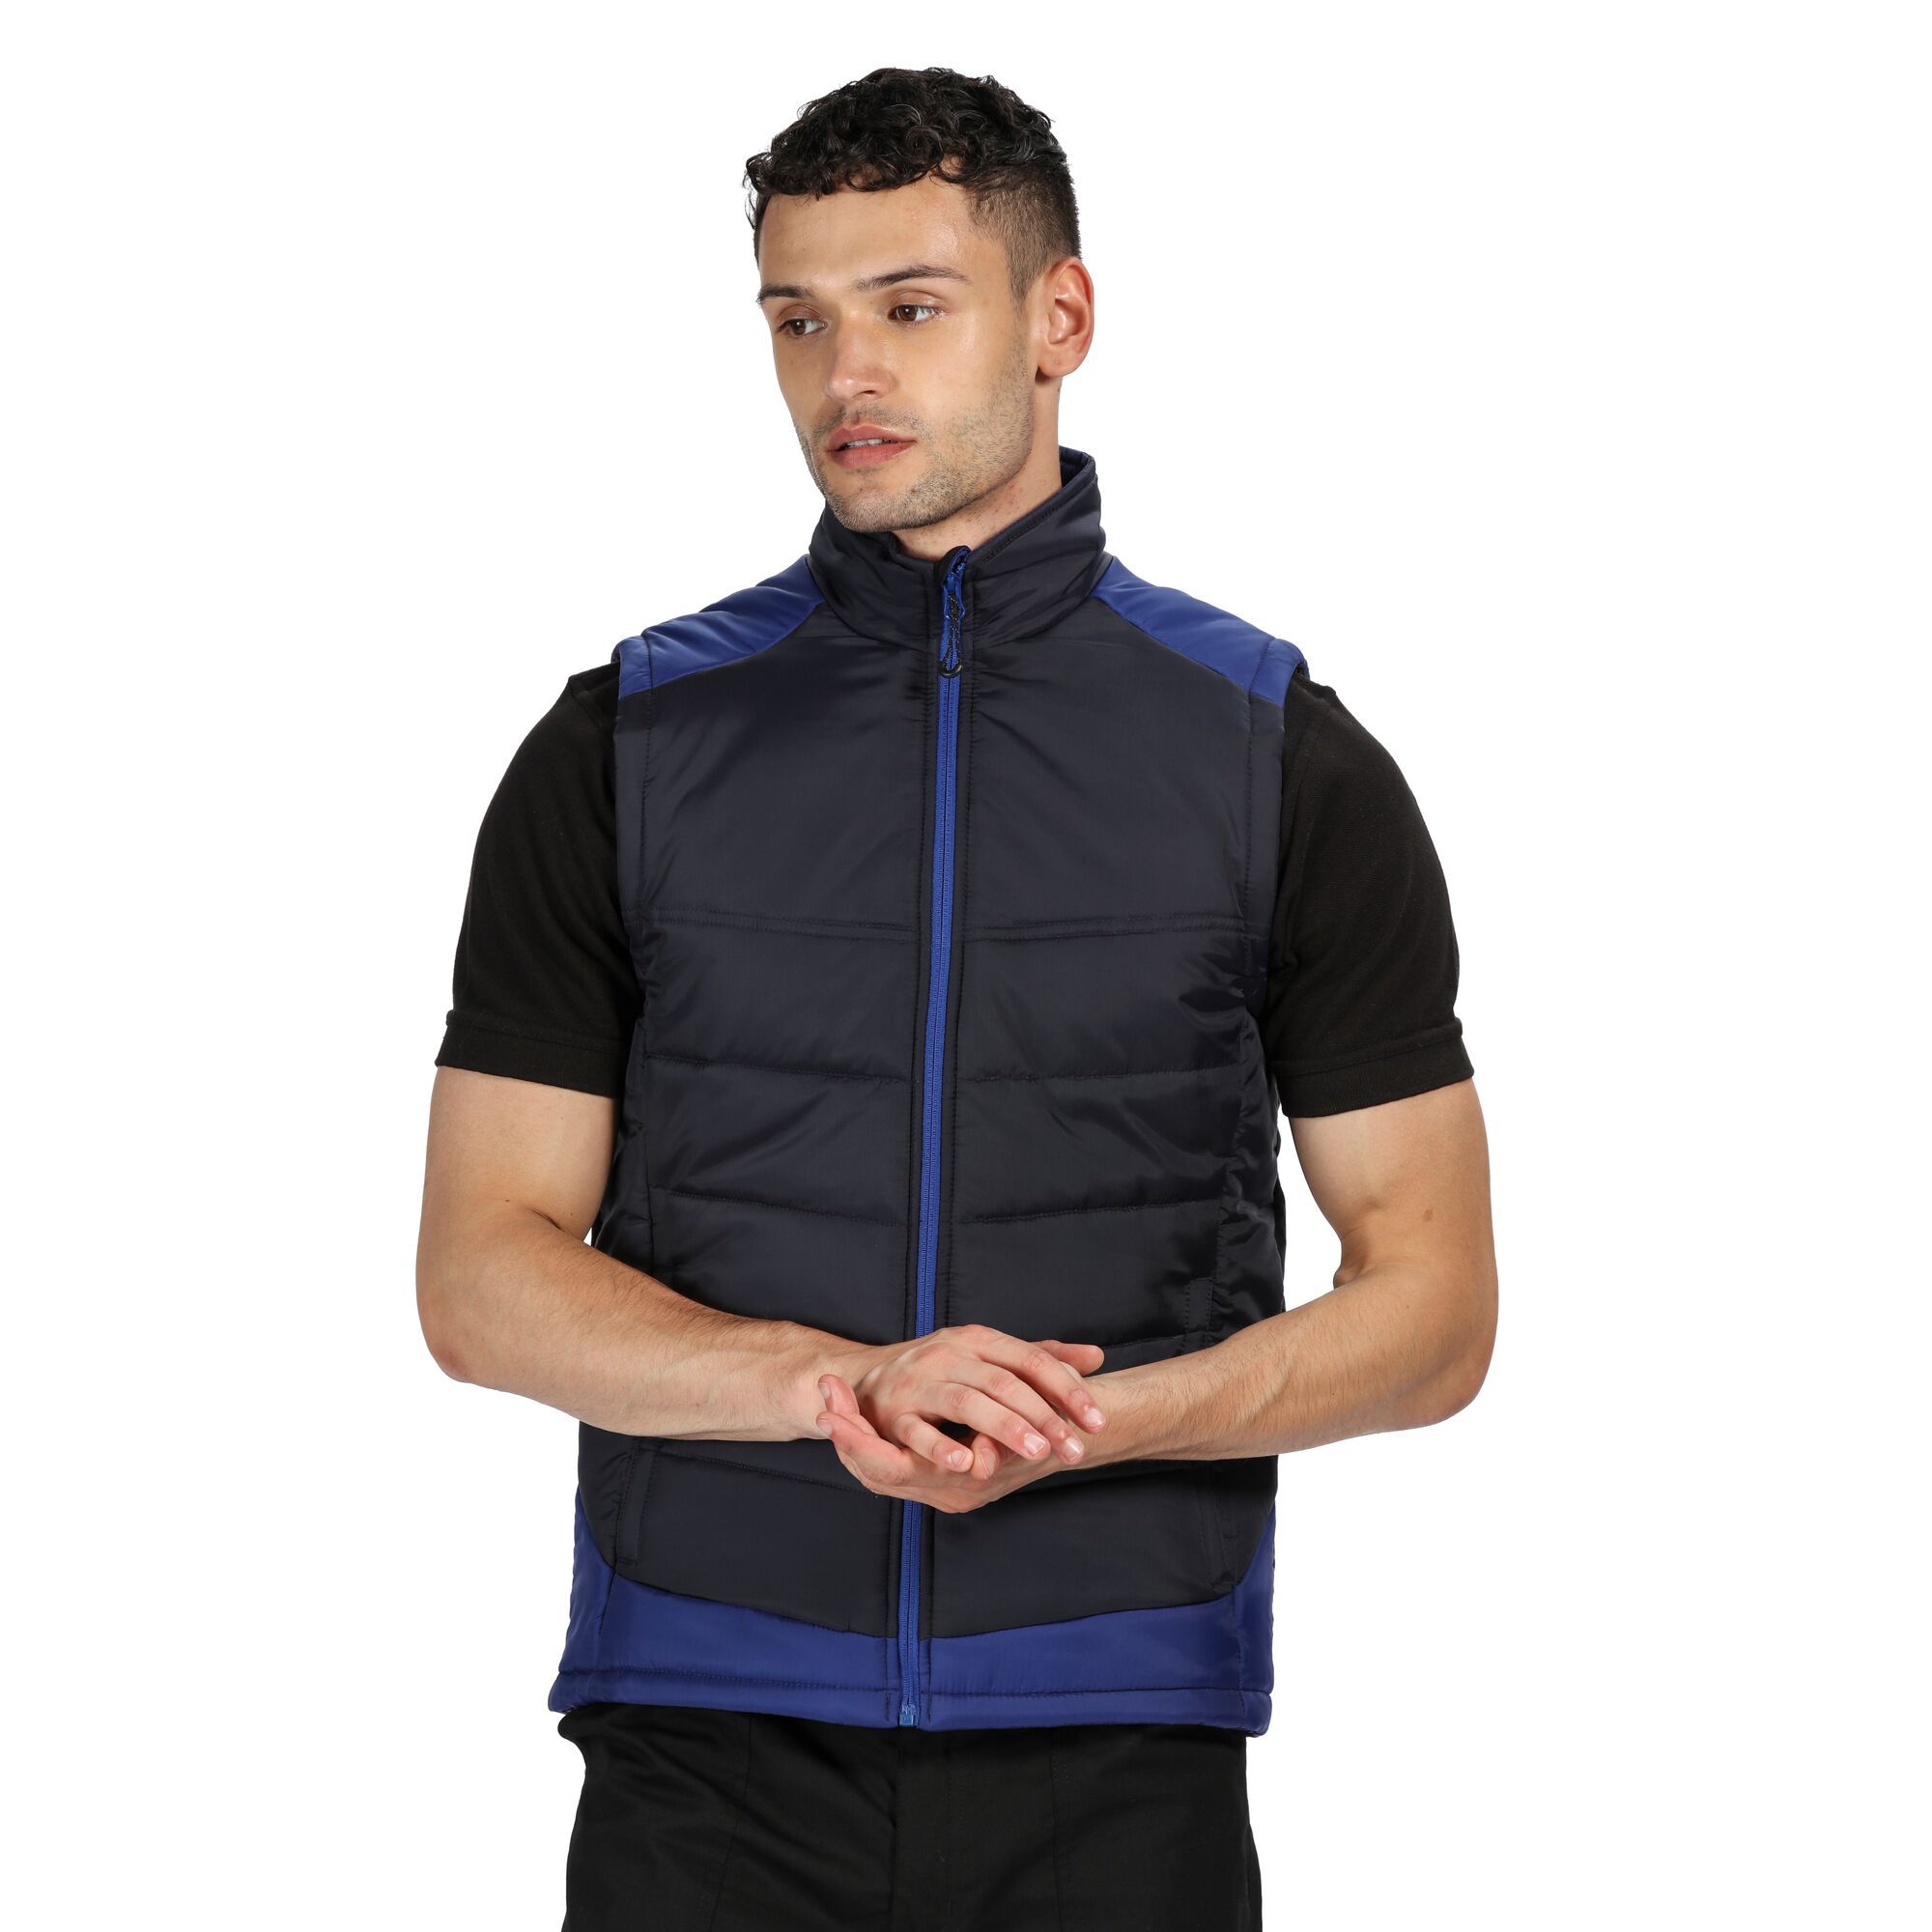 100% polyamide. Thermo-Guard insulation. 220 GSM body insulation wadding weight. Durable water repellent finish. Adjustable shockcord hem. Concealed zip entrance in lining for embroidery access. 2 zipped lower pockets.